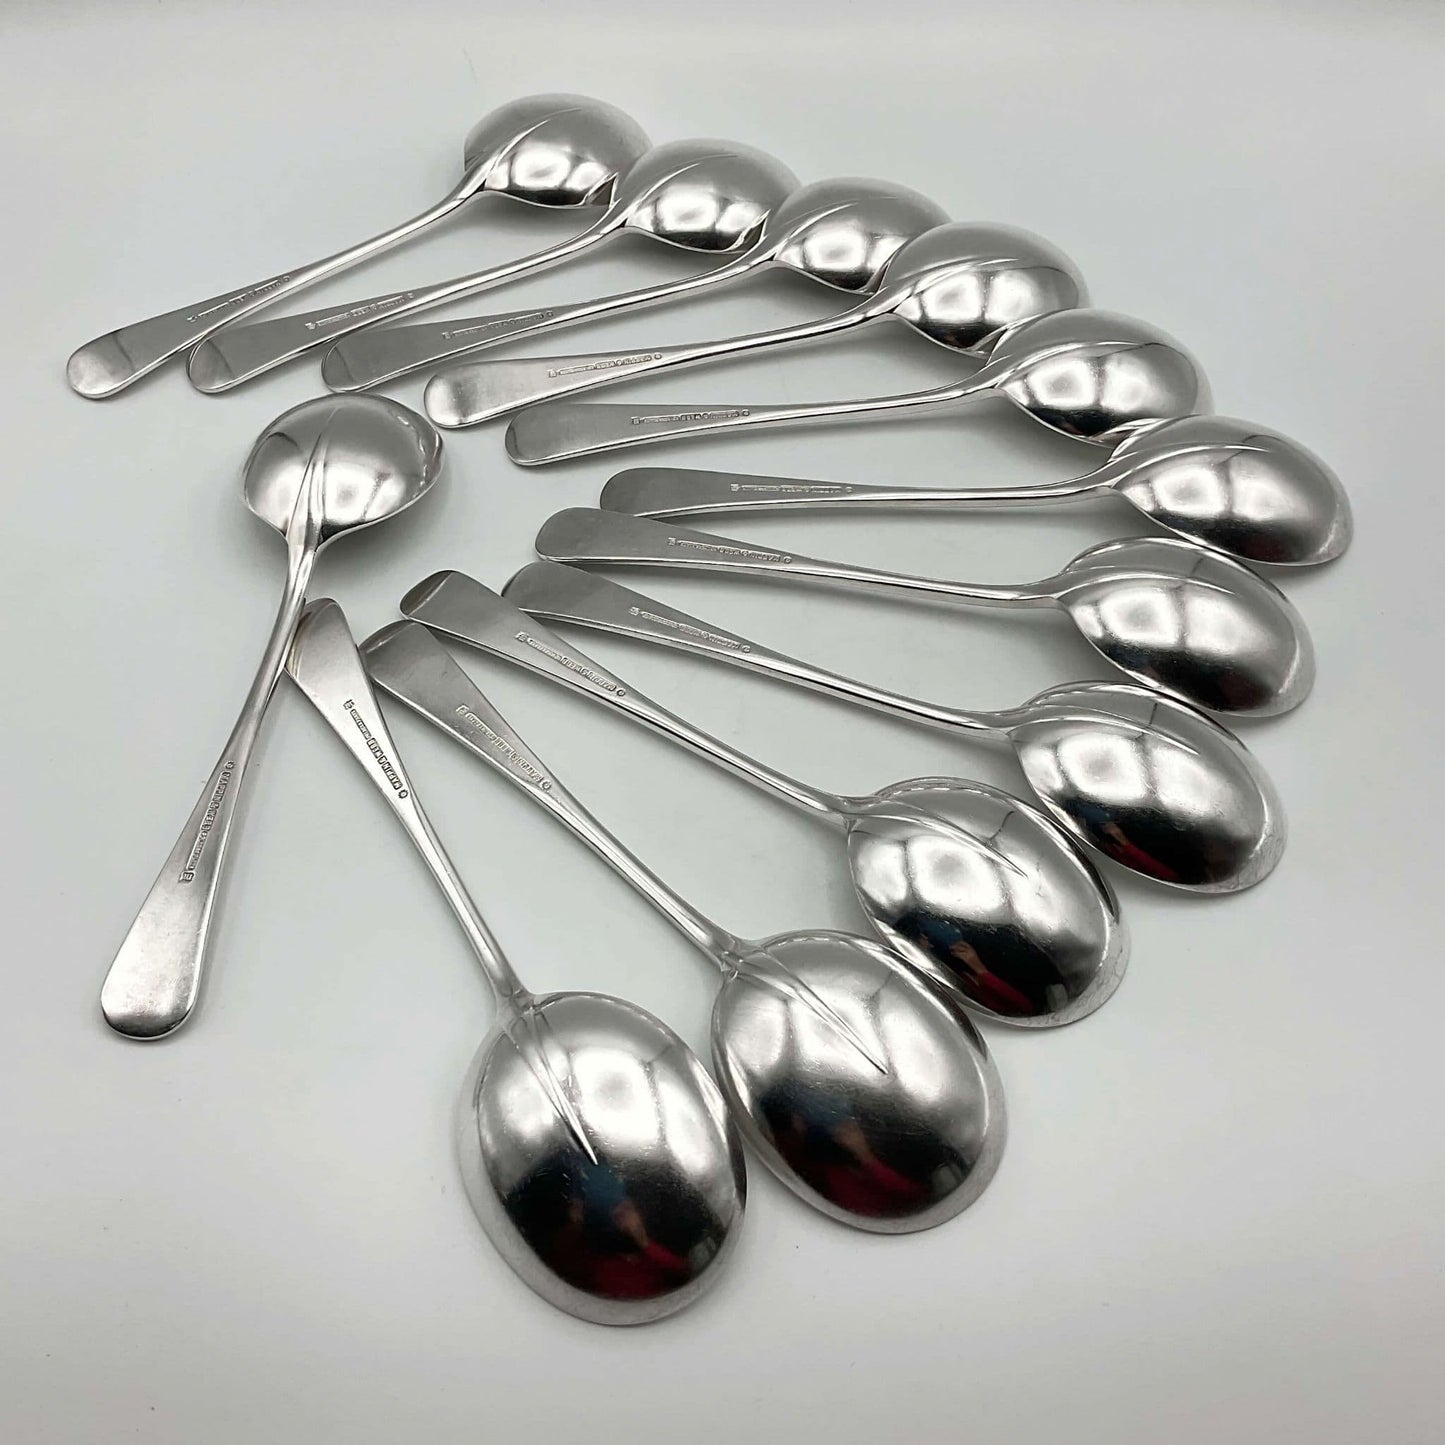 Antique Mappin & Webb Silver Plated Soup Spoons Set